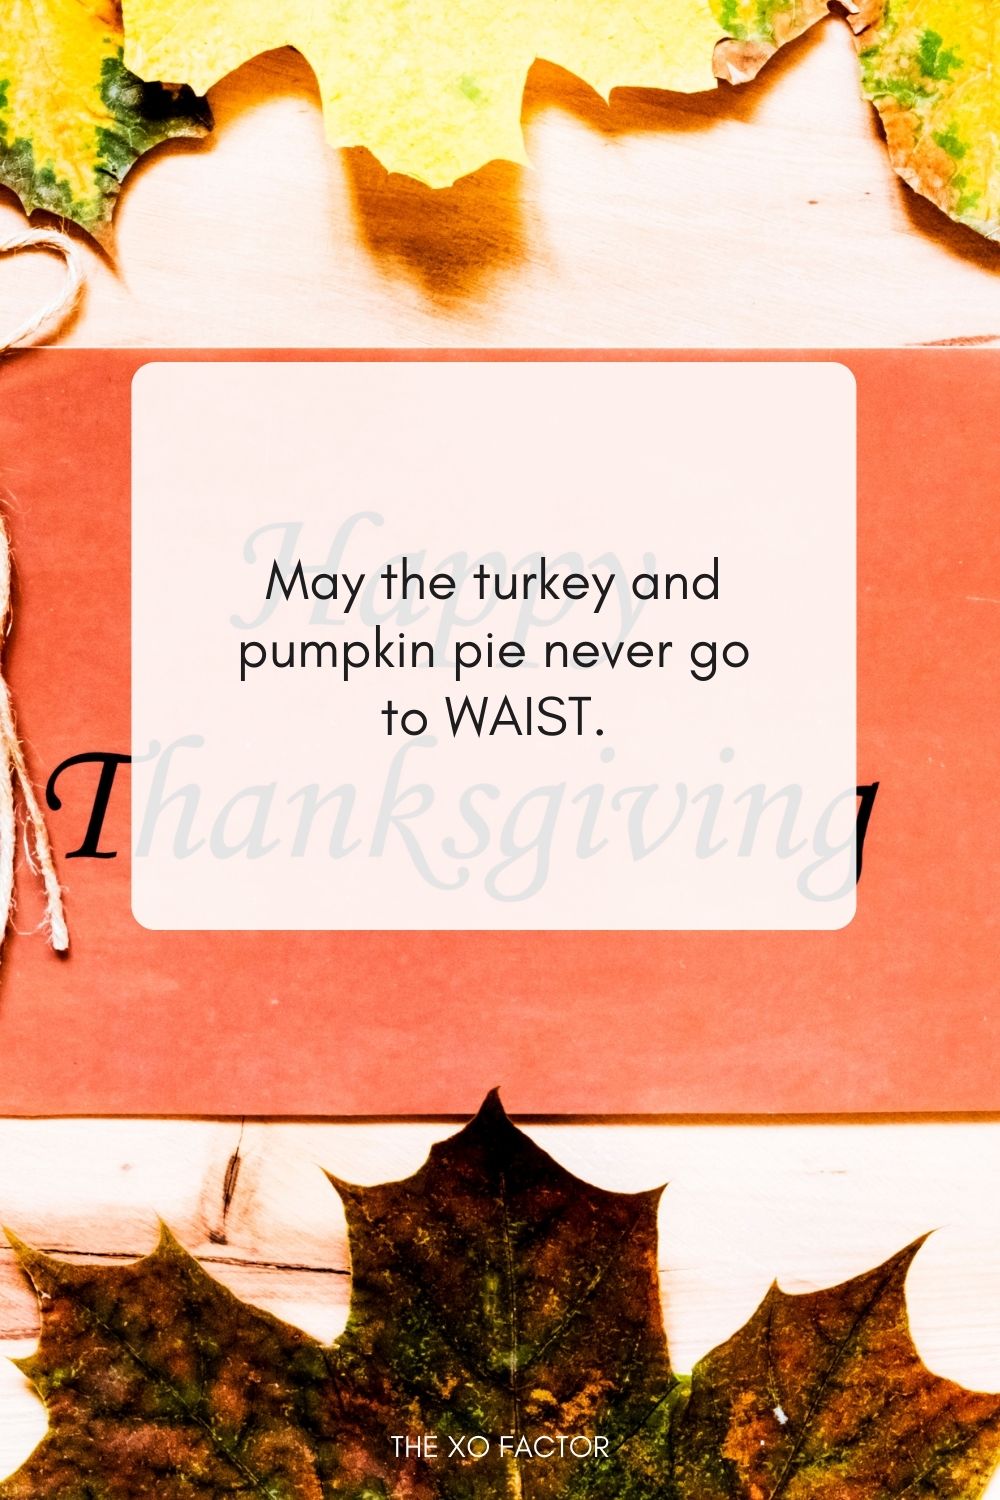 May the turkey and pumpkin pie never go to WAIST. Happy Thanksgiving!